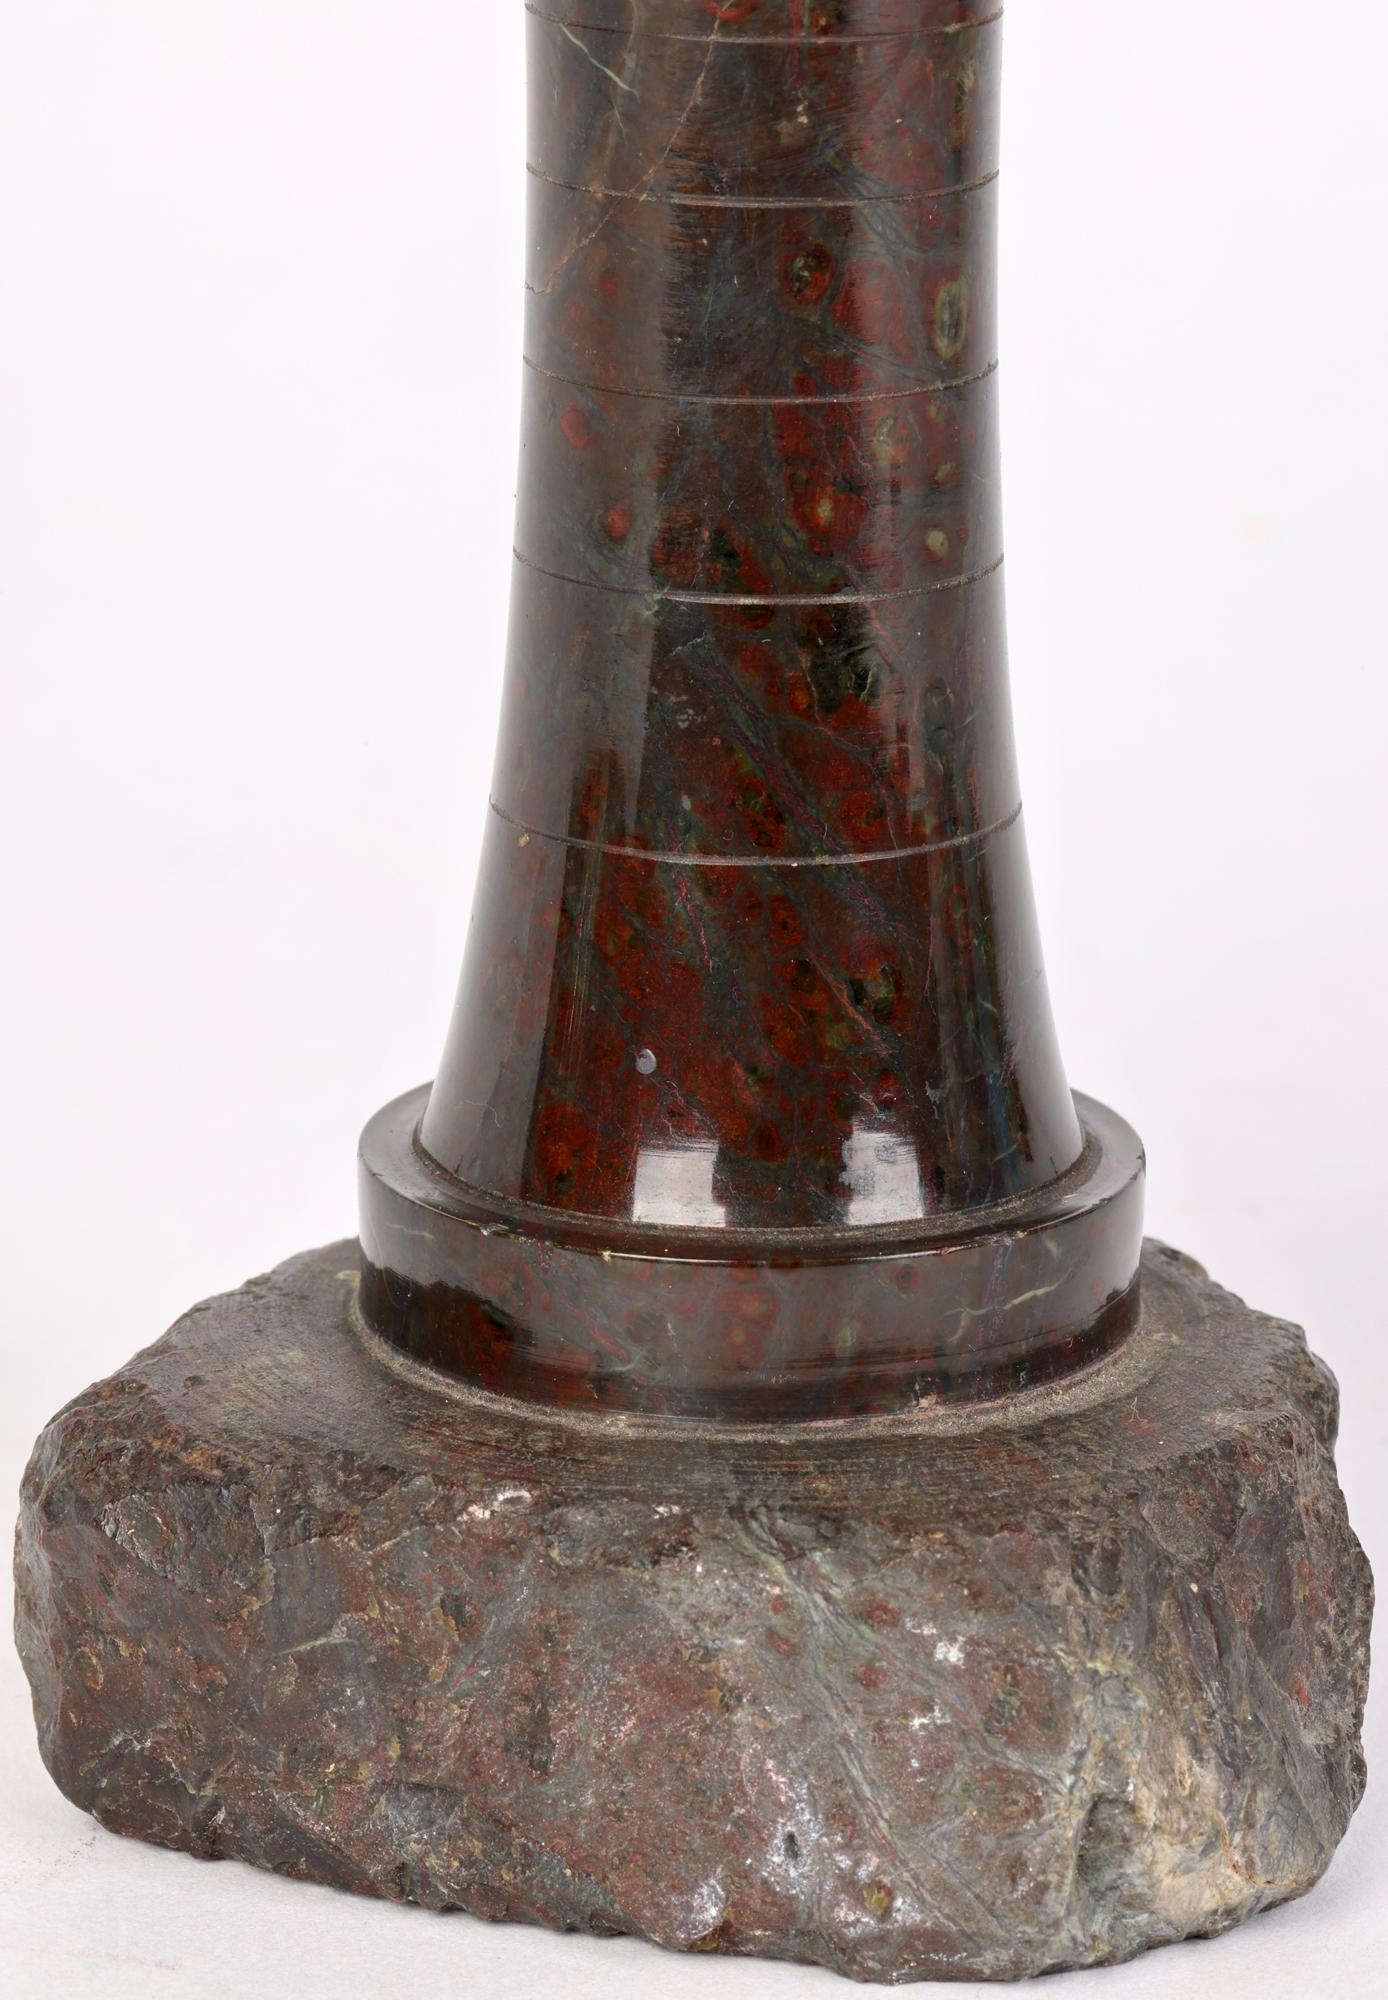 A stylish Cornish carved red serpentine stone ware model of a lighthouse dating from the early to mid 20th Century. The lighthouse is carved from a single piece of stone with the base left unpolished in its natural state to give the effect of the